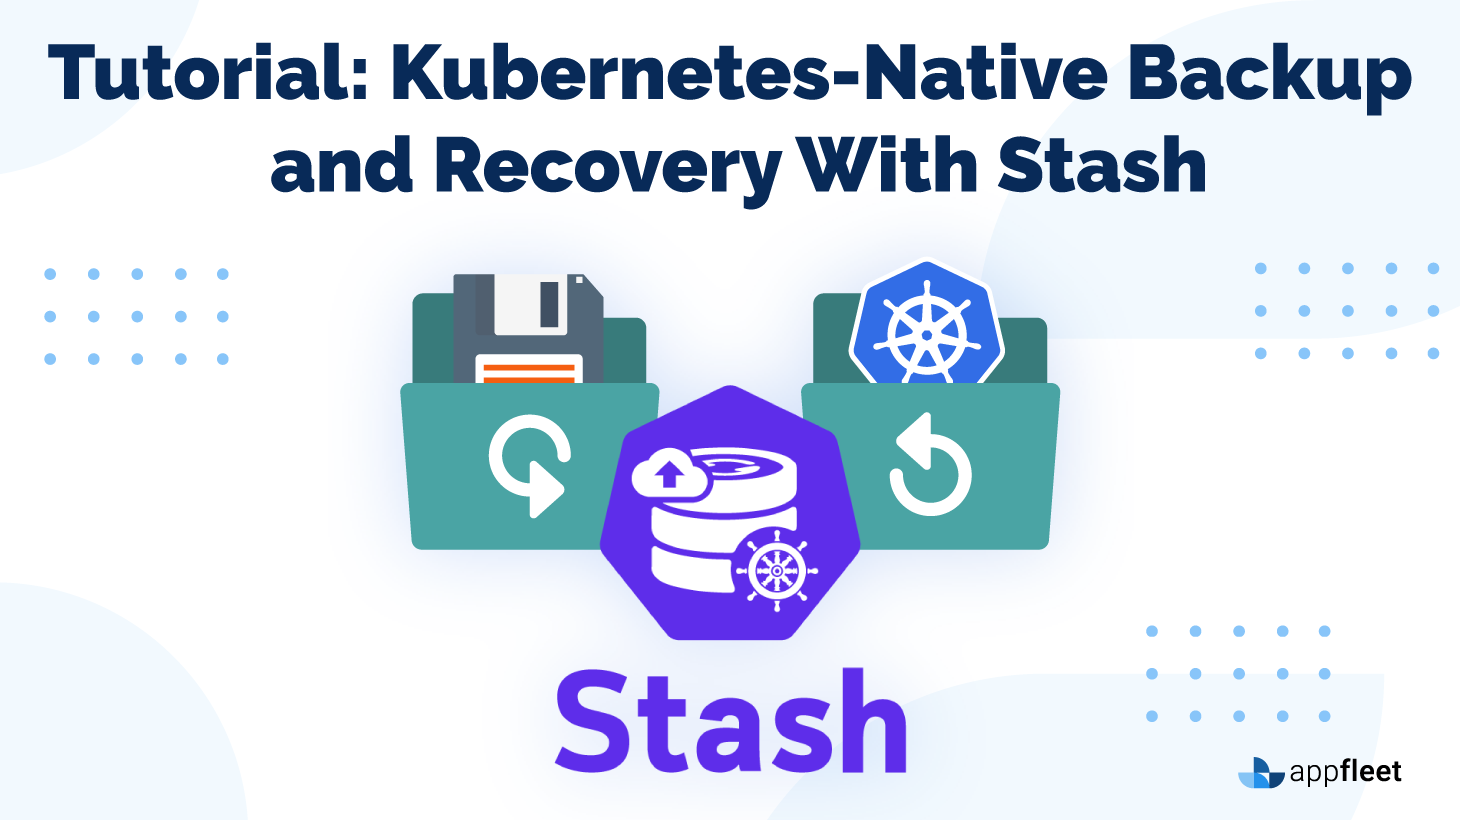 Tutorial: Kubernetes-Native Backup and Recovery With Stash